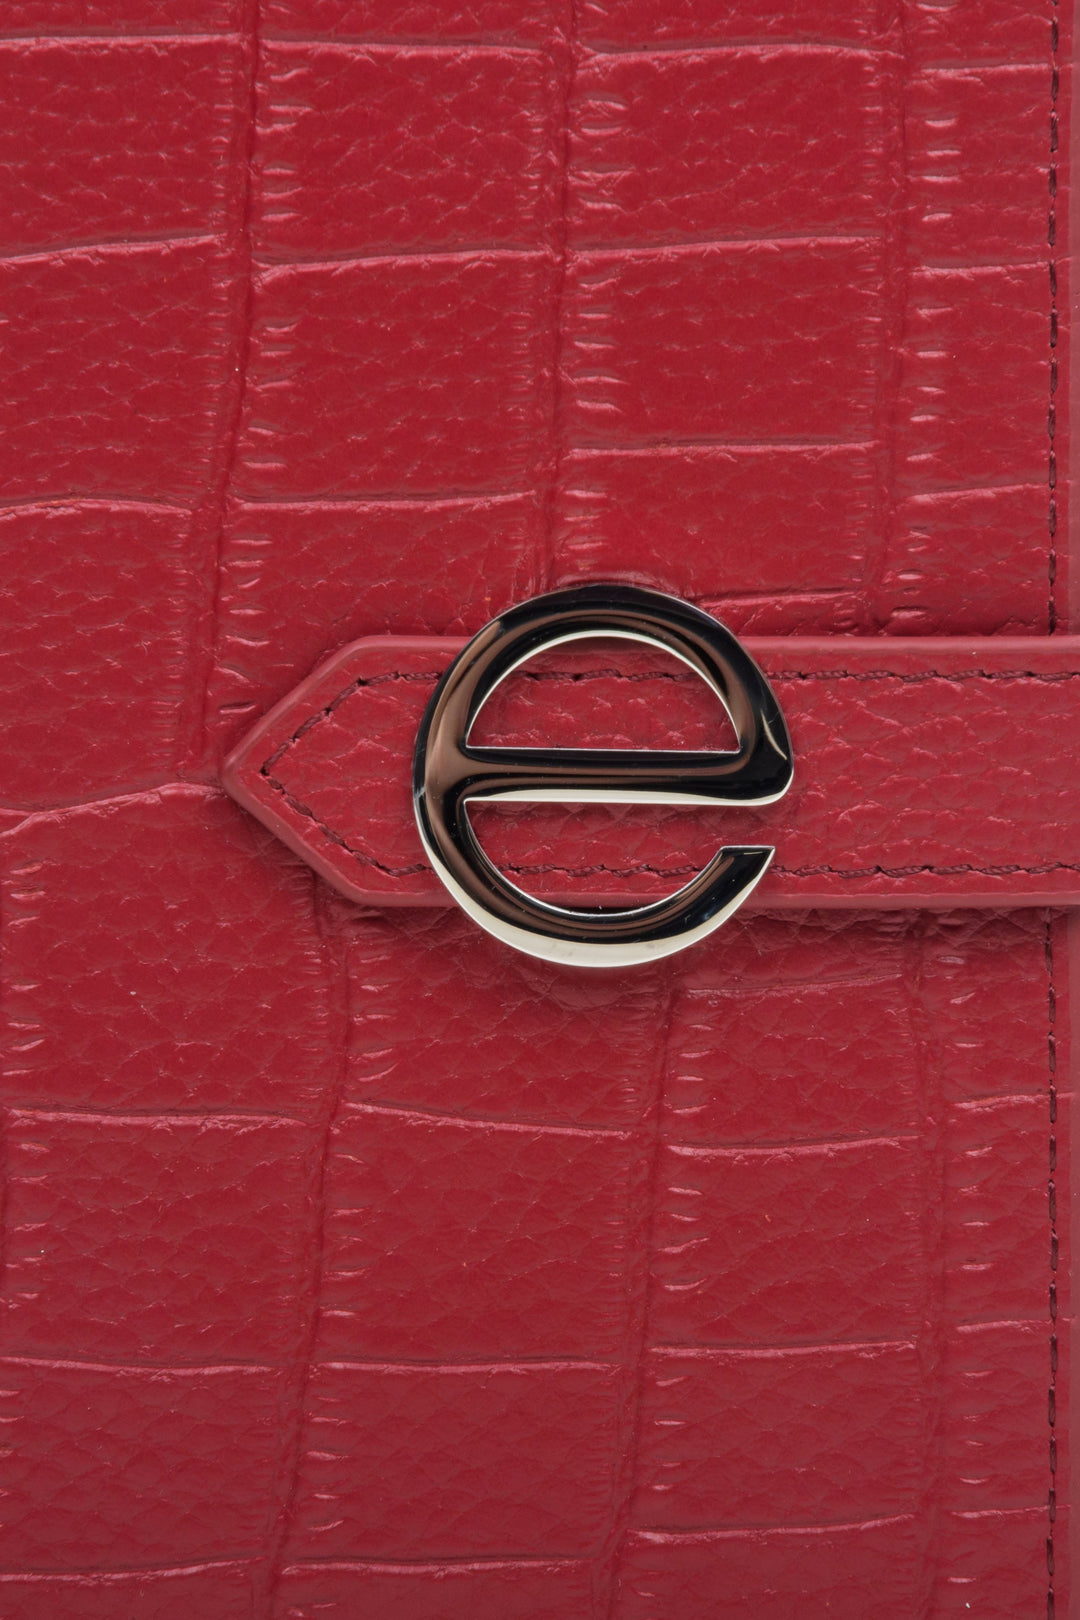 Women's large red leather wallet by Estro - close-up on details.